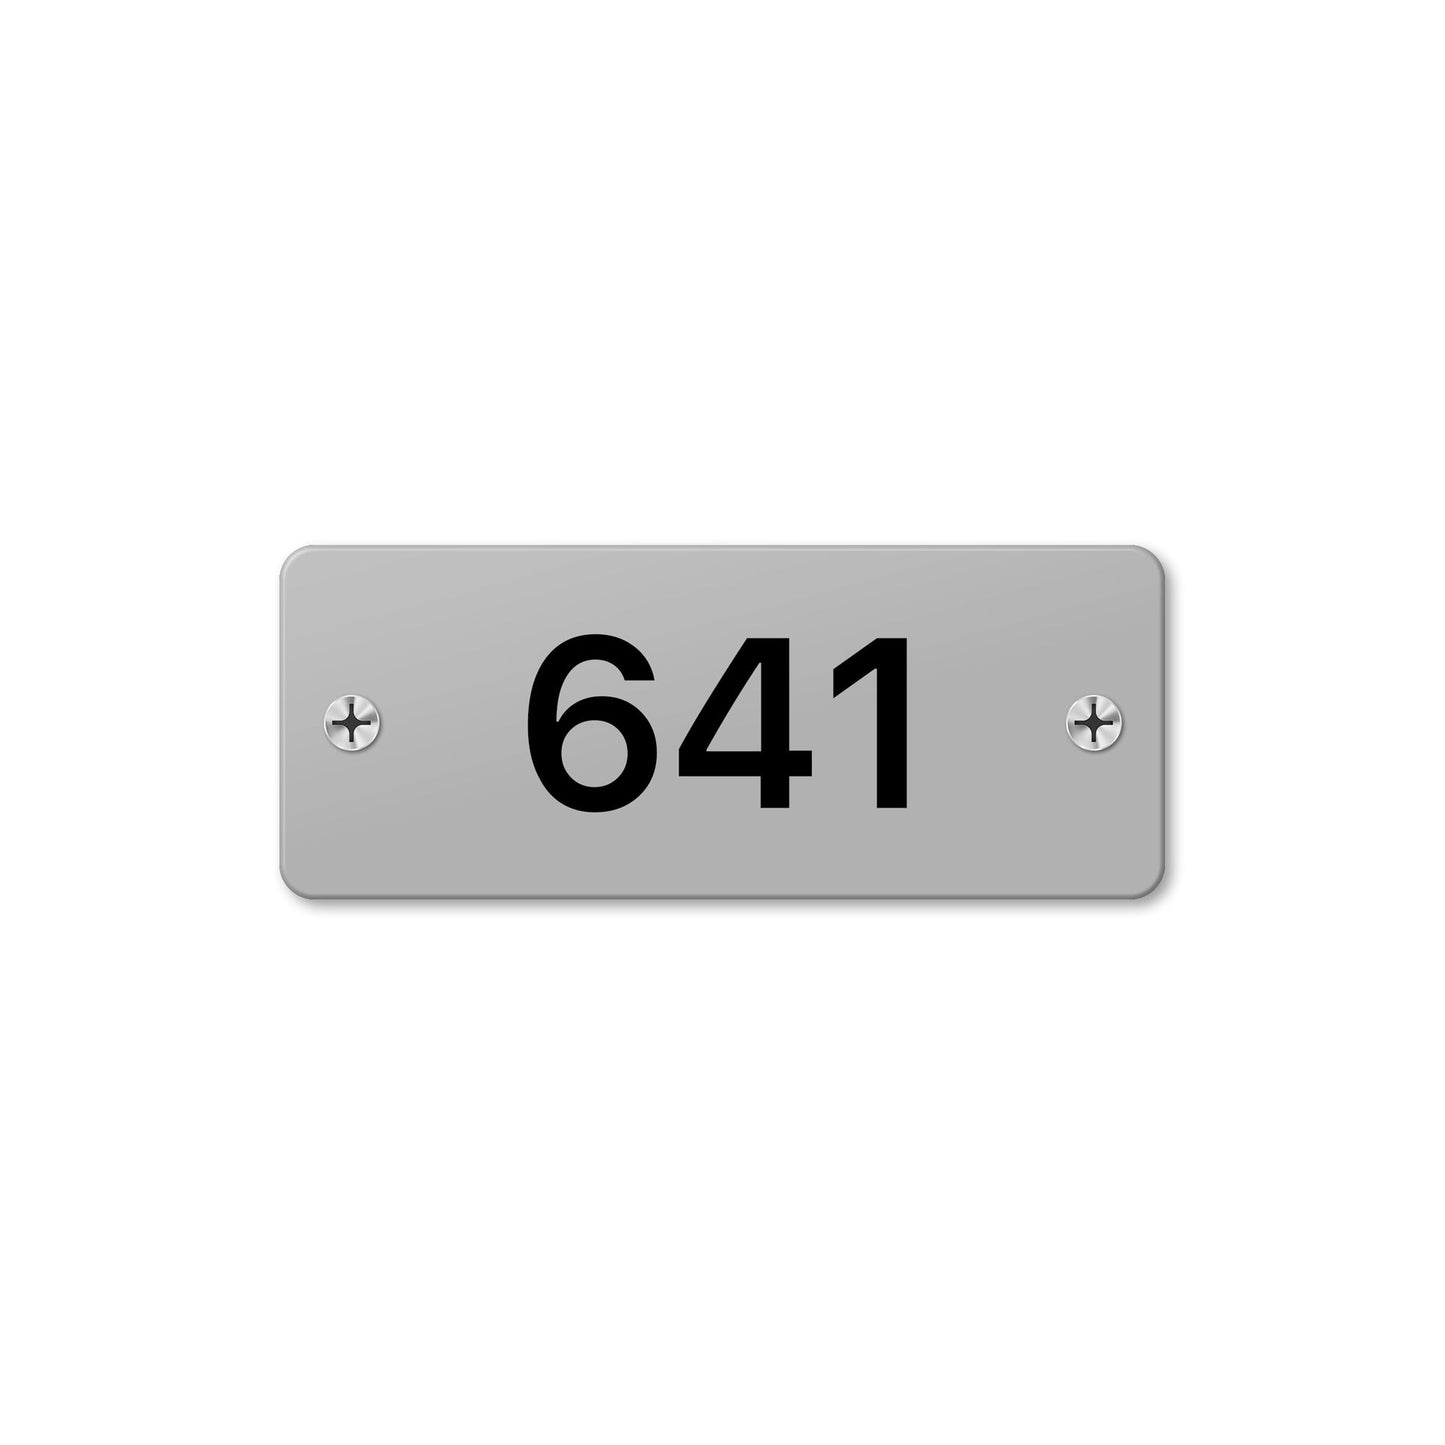 Numeral 641